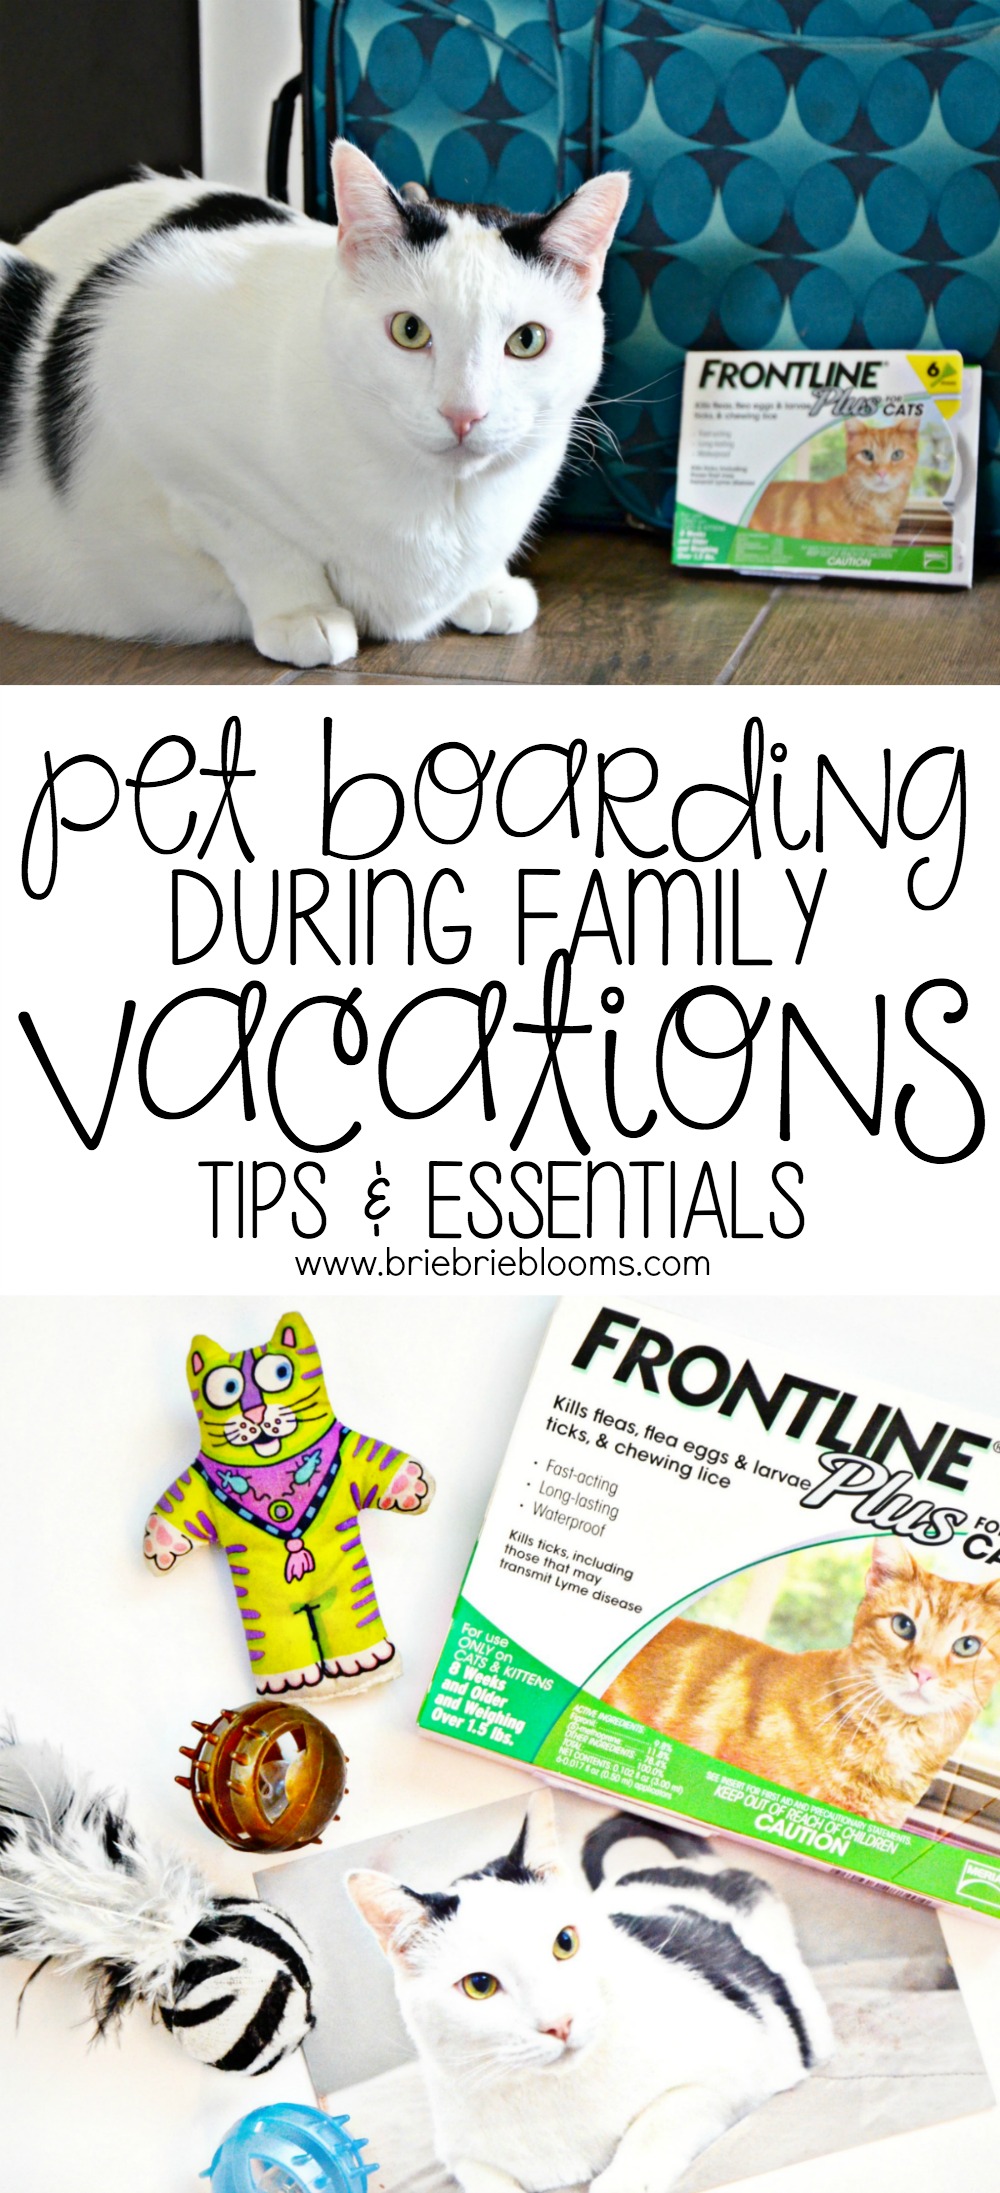 FRONTLINE® Plus for Cats Flea and Tick Treatment from Walmart is an essential to our family for boarding because we have multiple indoor cats that rarely are exposed to anything outside of our own home. Check out these tips and essentials for pet boarding during family vacations. 